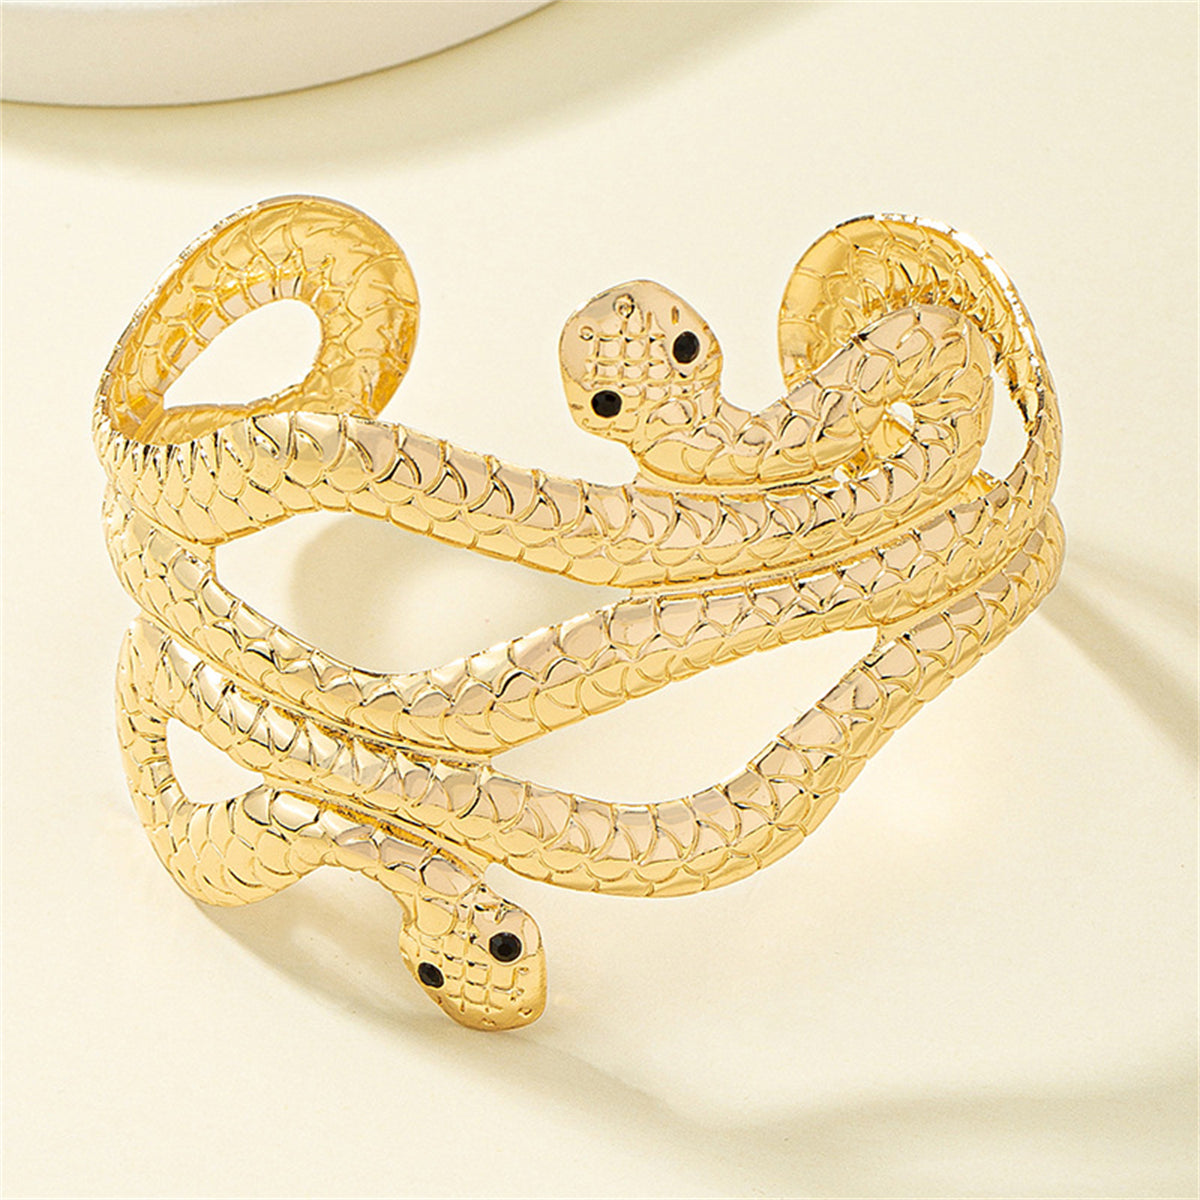 Cubic Zirconia & 18K Gold-Plated Snake Cuff